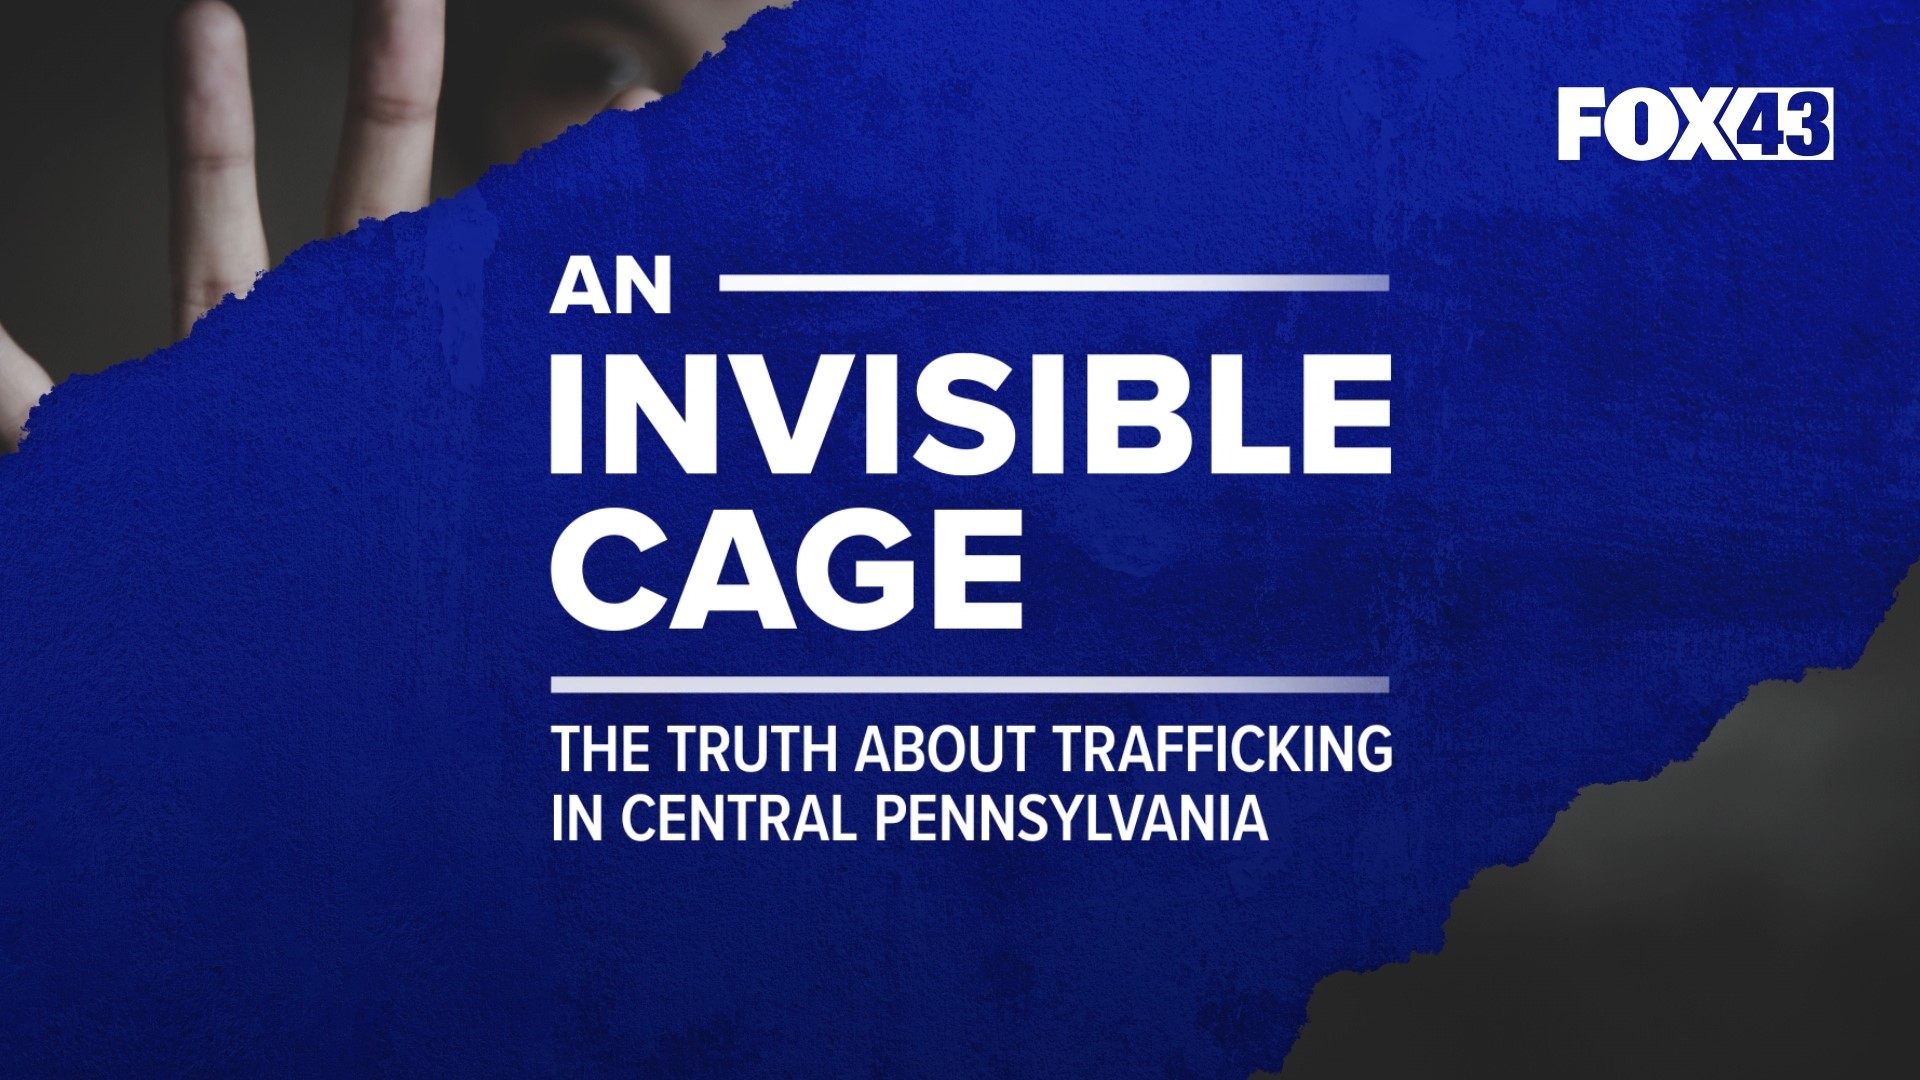 Human Trafficking is on the rise everywhere, including Pennsylvania. We spoke with victims and experts to break down the warning signs and signals of trafficking.